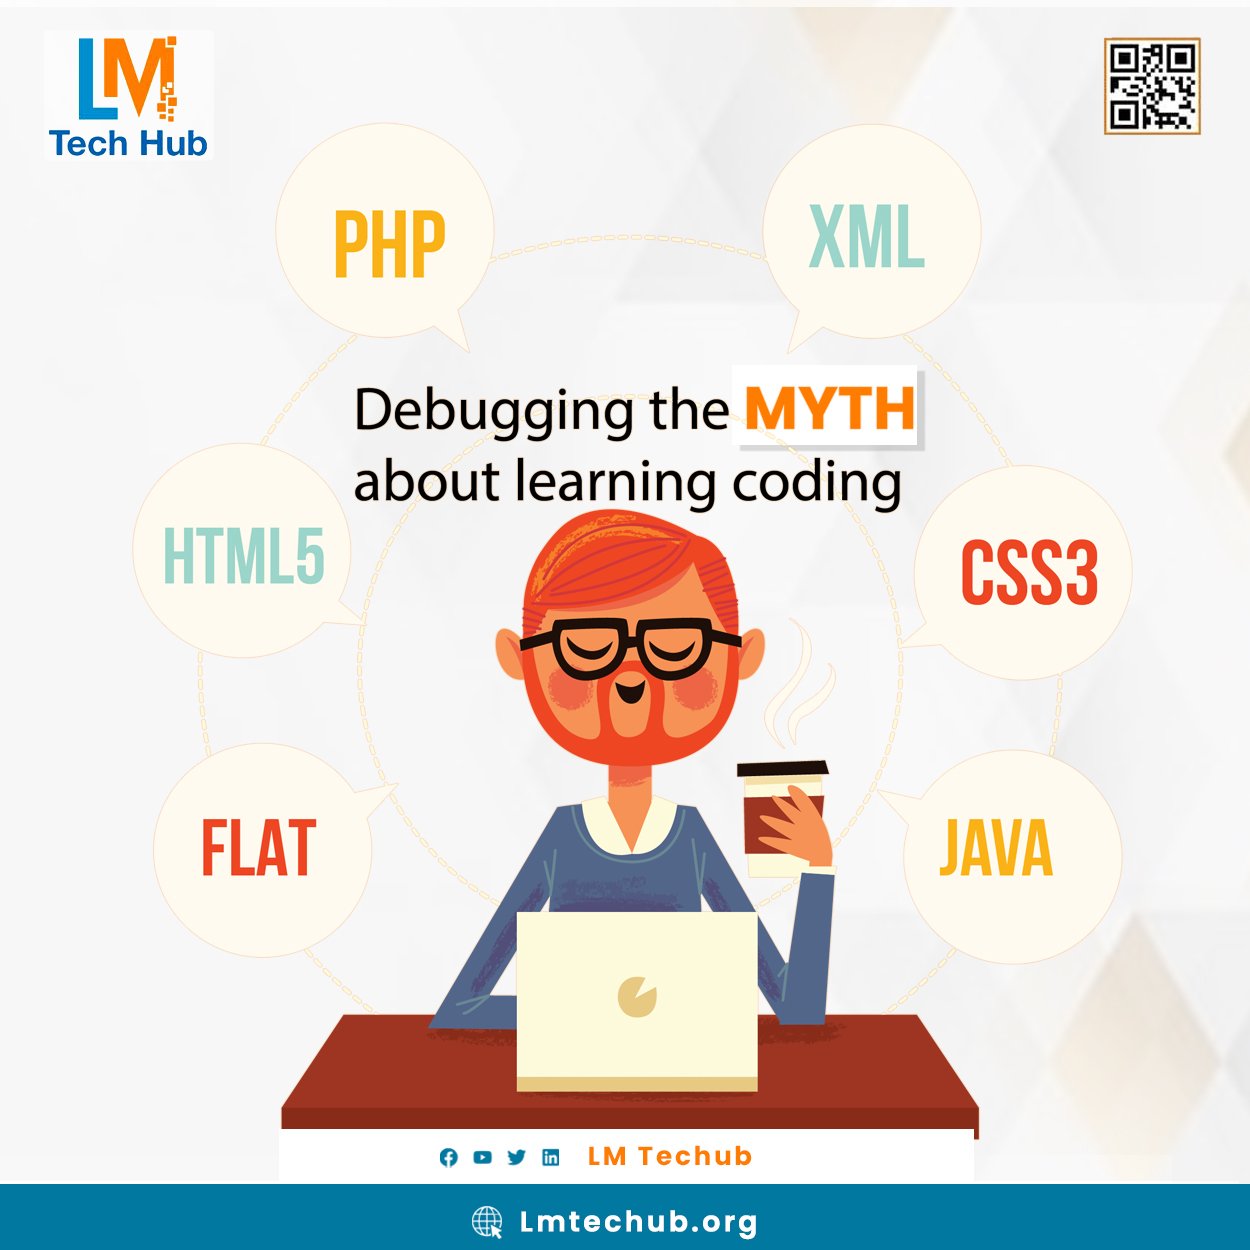 Debugging the myth about learning coding. LM Tech Hub